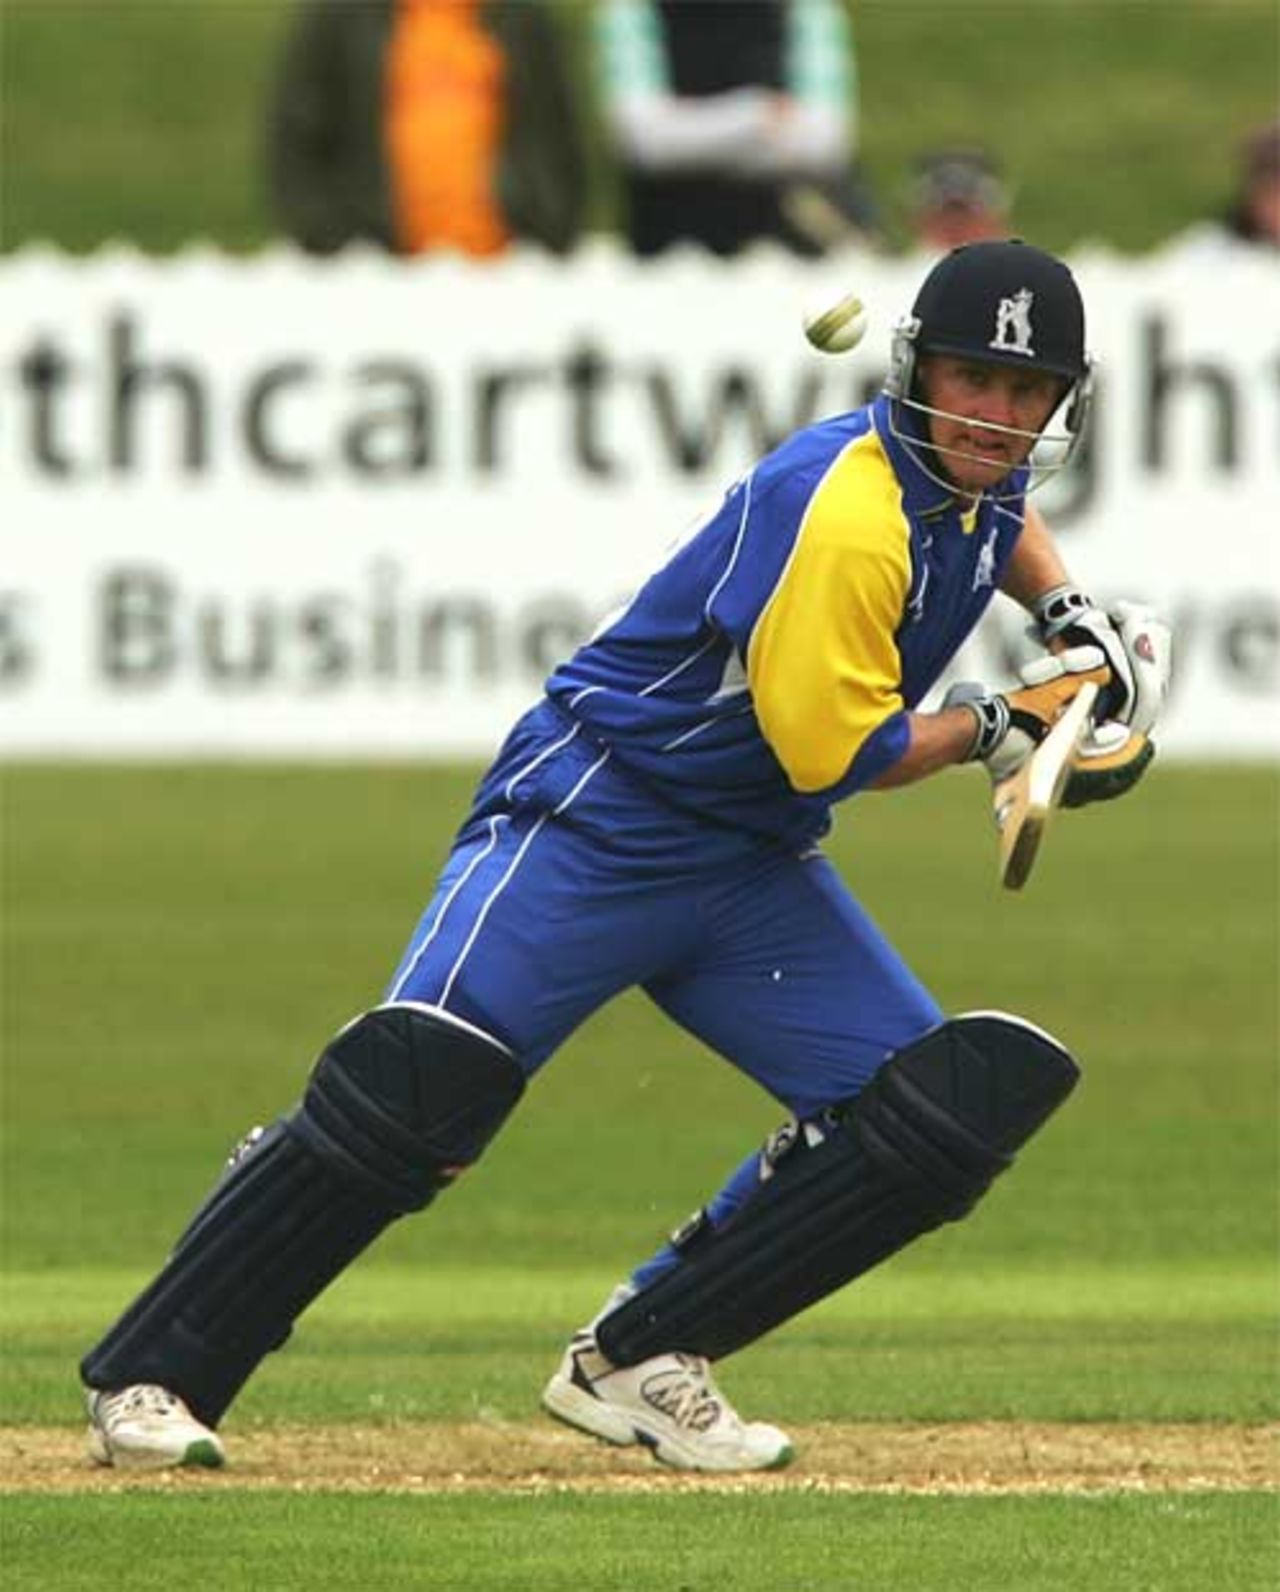 Darren Maddy pushes one through point as play finally gets underway, Derbyshire v Warwiskhire, Friends Provident Trophy, May 7, 2007